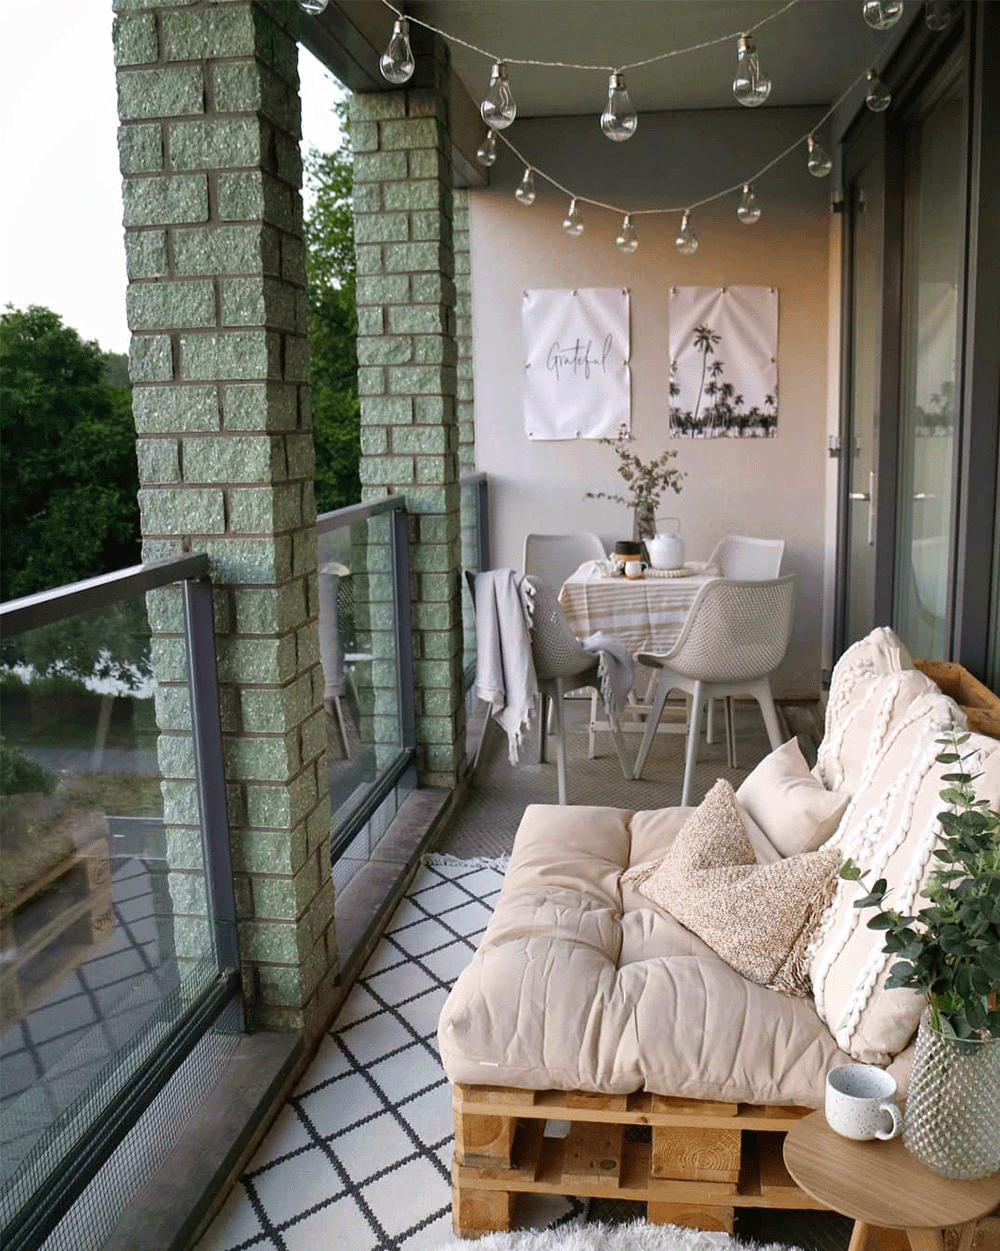 relax seating and a dining area on a balcony